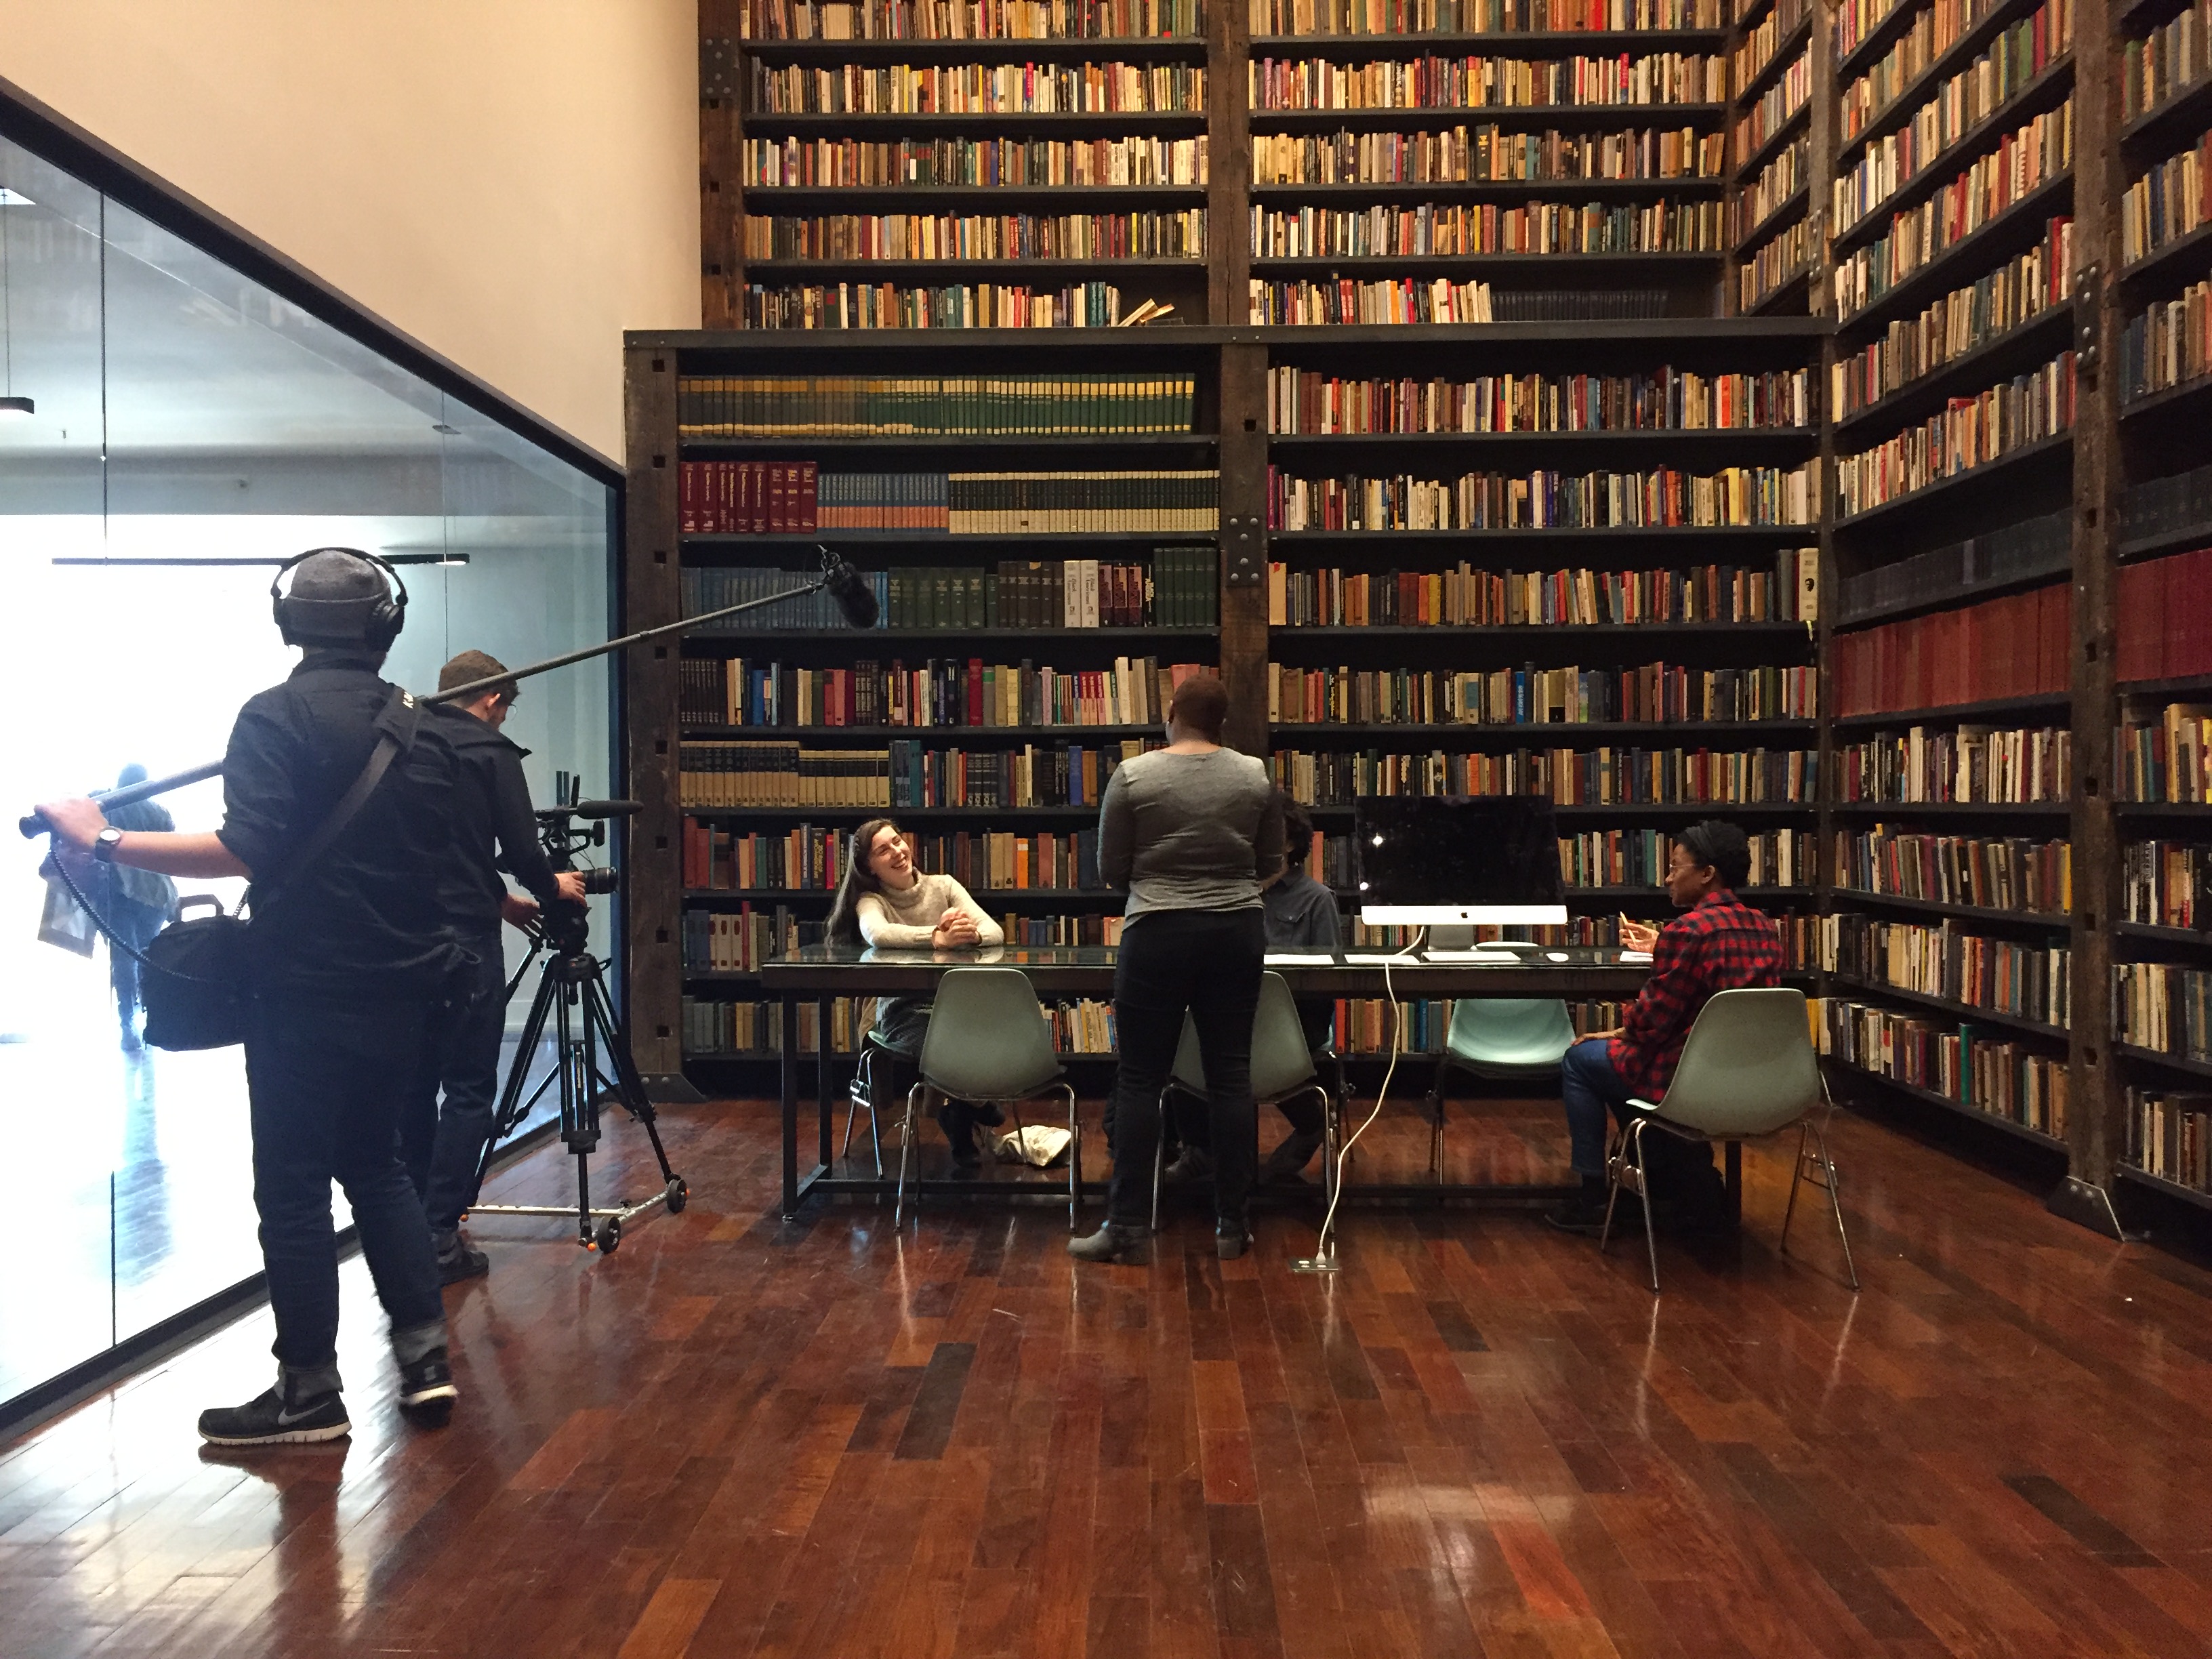 ART21 filming at Theaster Gates’s Stony Island Arts Bank in Chicago, USA, 2016. Behind the scenes of ART21’s series Art in the Twenty-First Century, Season 8, 2016. Photo: Brian Ashby. © ART21, Inc. 2016.